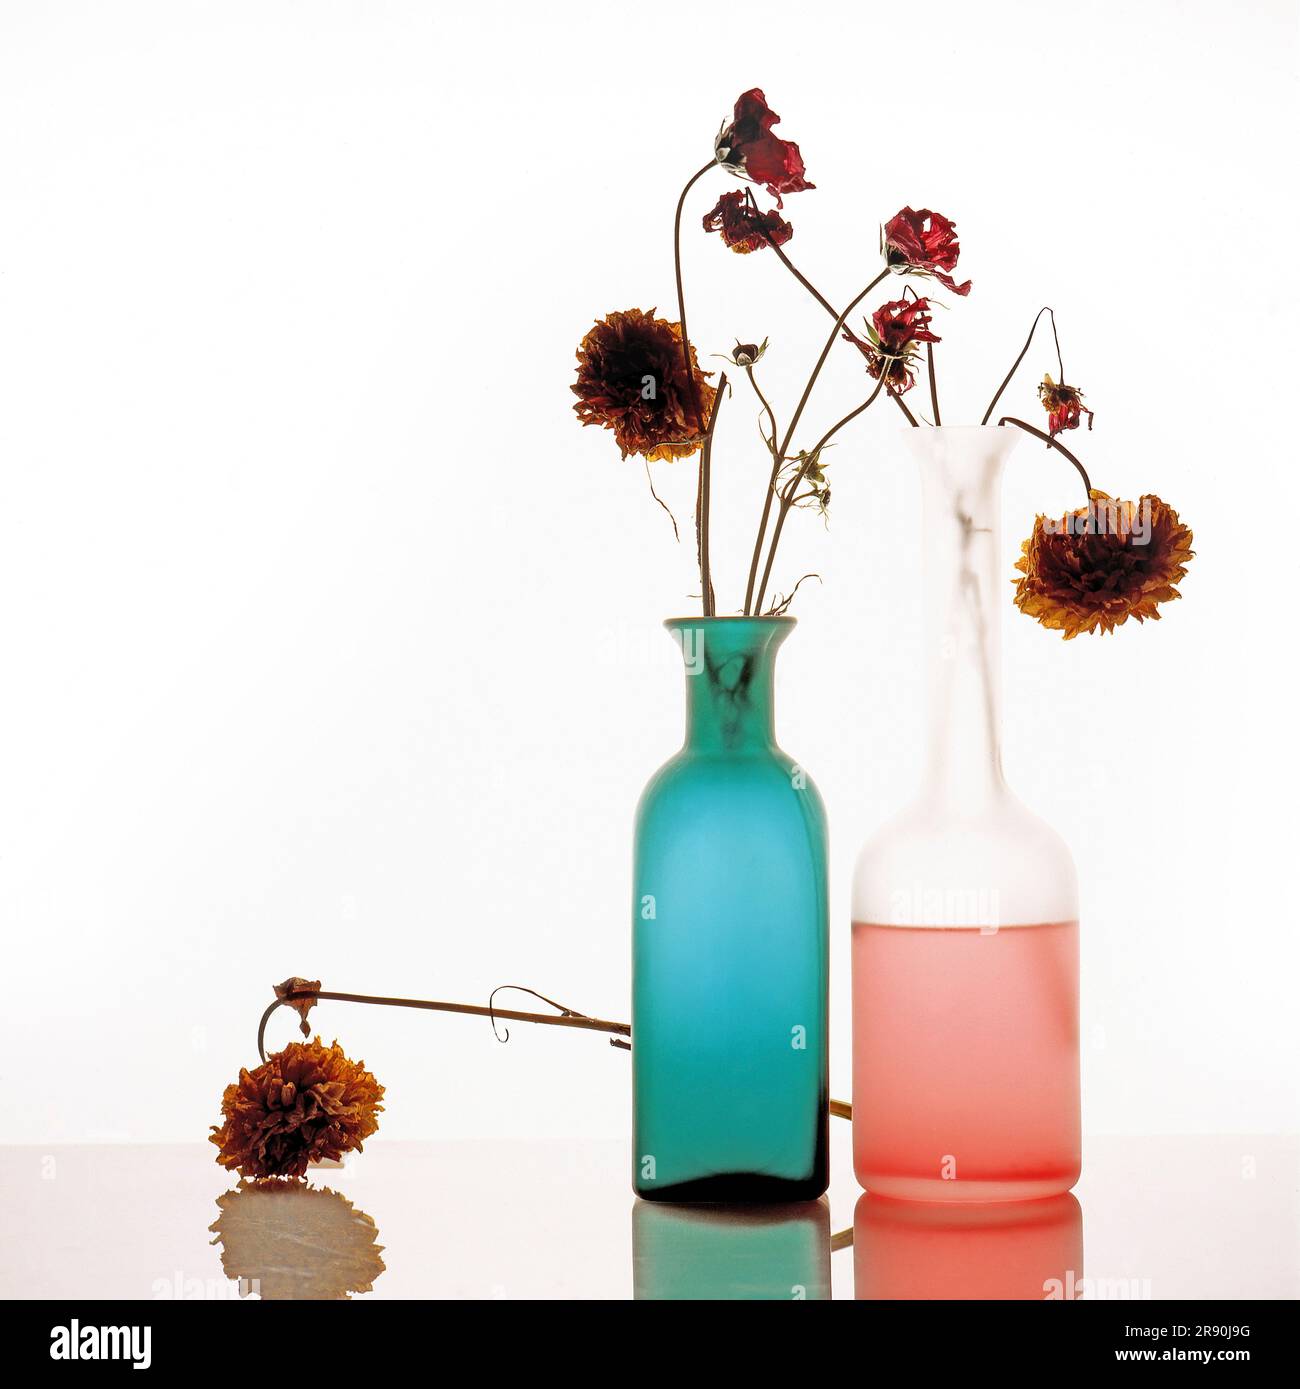 Zinnia flowers in a glass bottle on white background Stock Photo